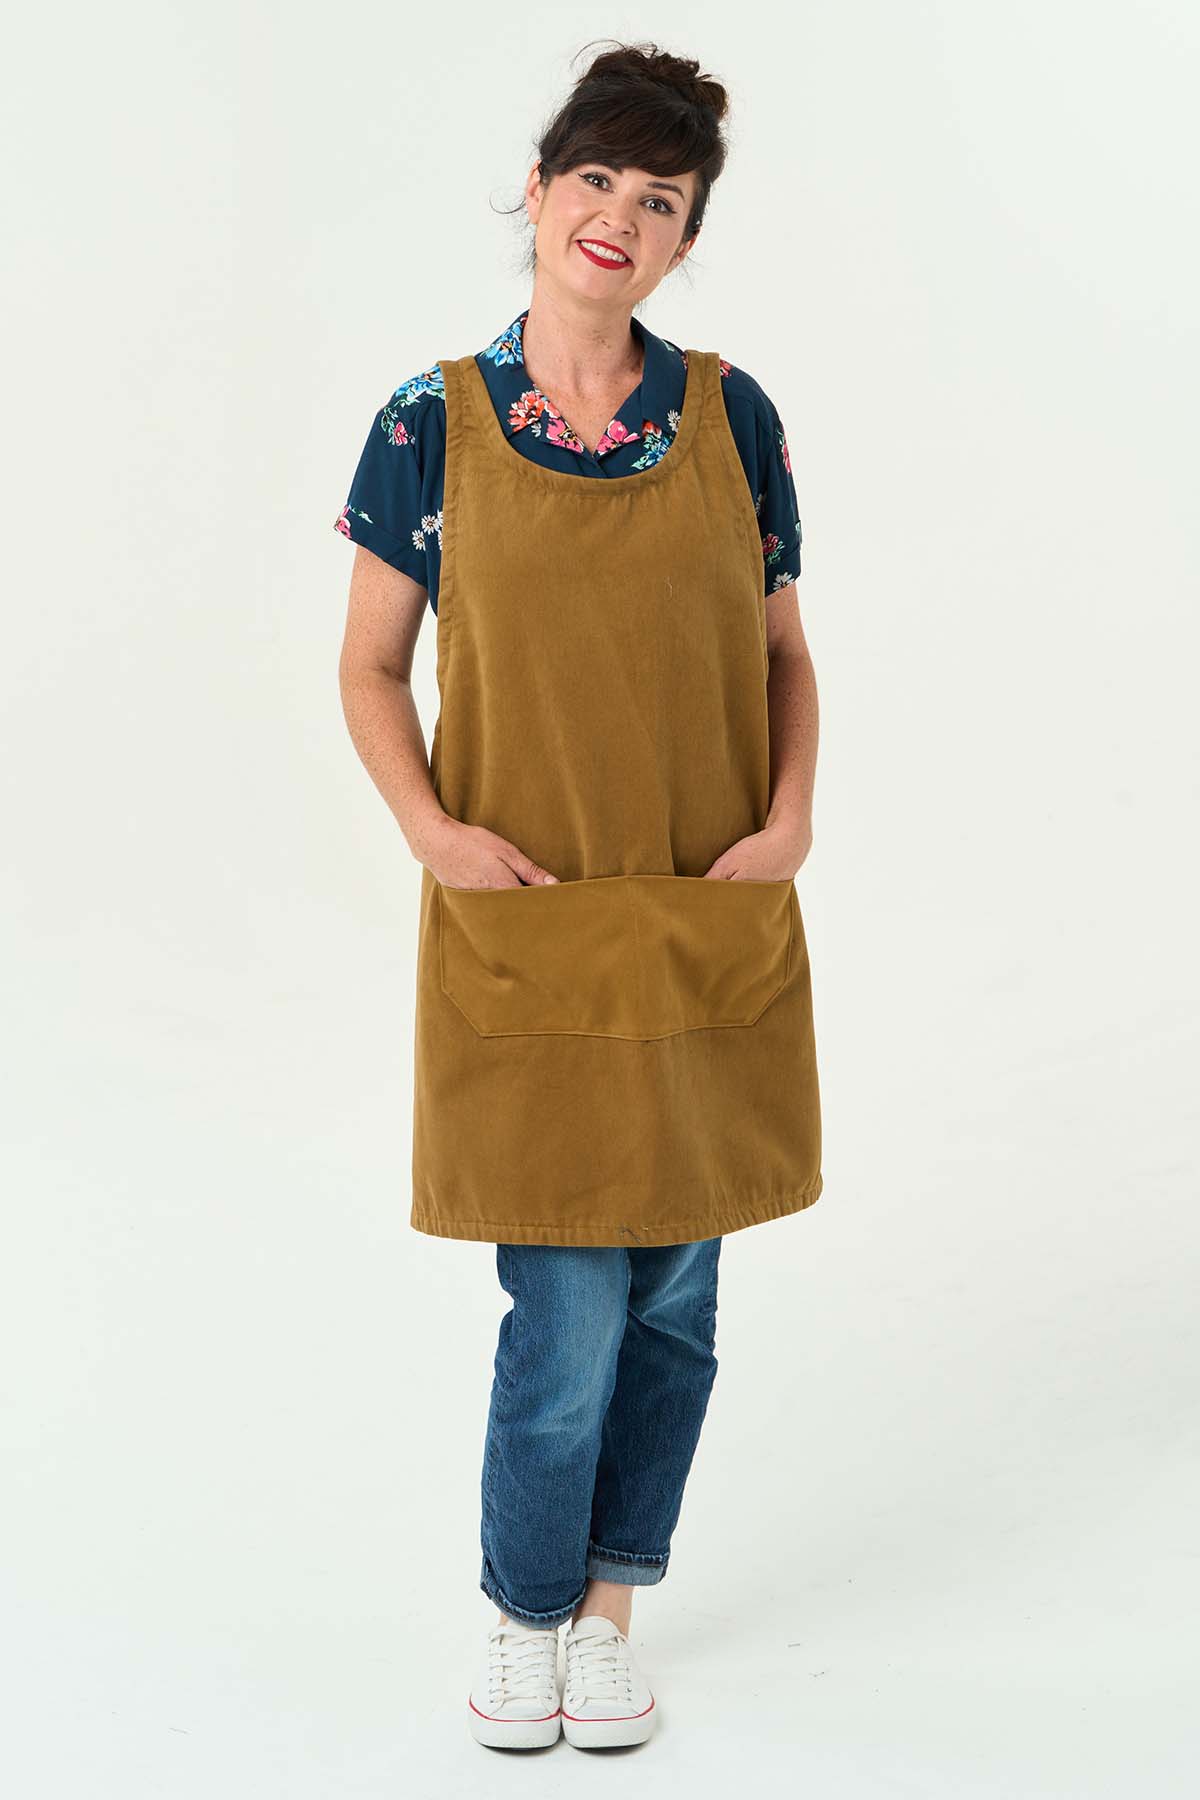 Women wearing the Apron sewing pattern from Sew Over It on The Fold Line. An apron pattern made in cotton twill, cotton drill, canvas or denim fabrics, featuring a cross over back, divided front pocket and scoop neckline.